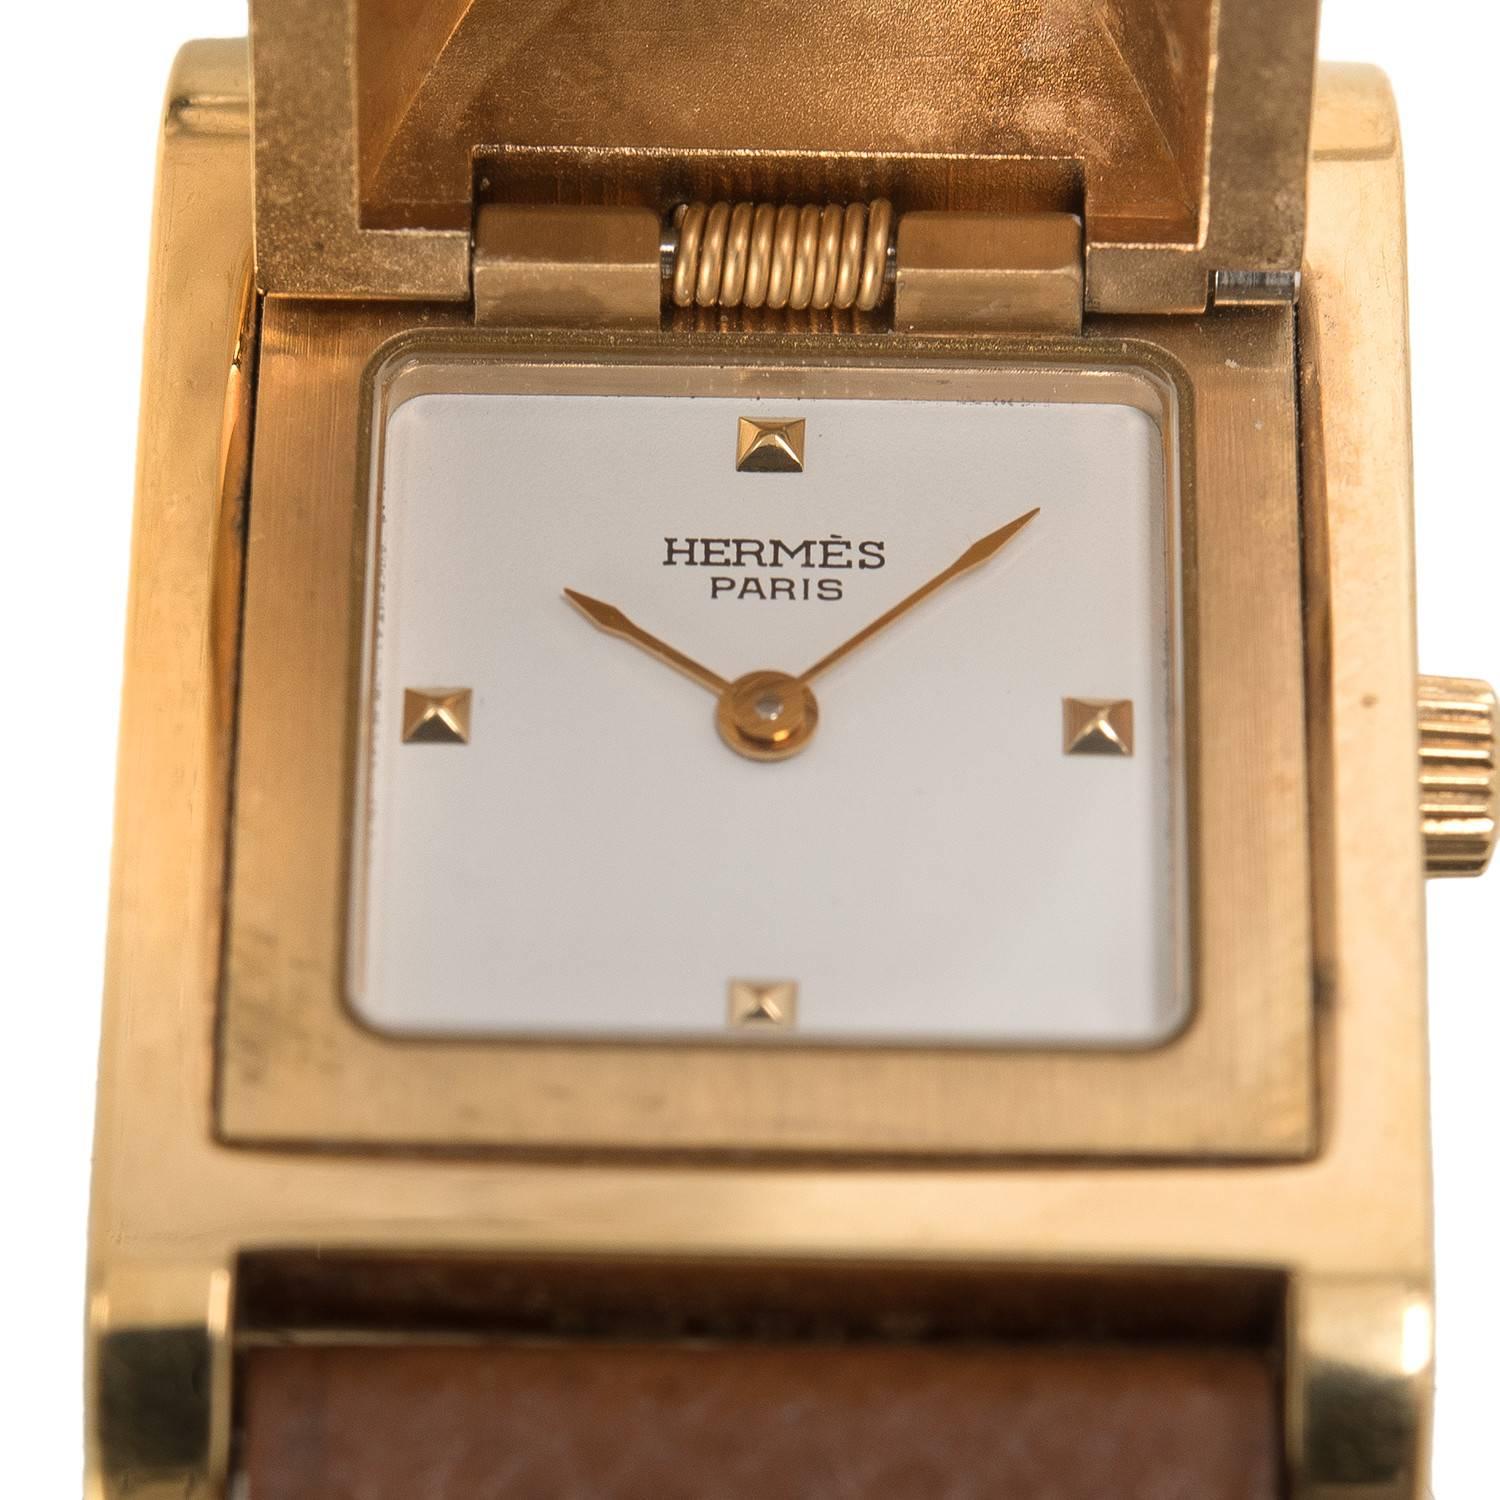 Hermes Medor watch in Gold courcheval in a size PM.

This stunning style made of gold plated stainless steel features swiss quartz movement, white dial, sapphire crystal push-pull crown, and adjustable Gold courcheval band with an Hermes stamped